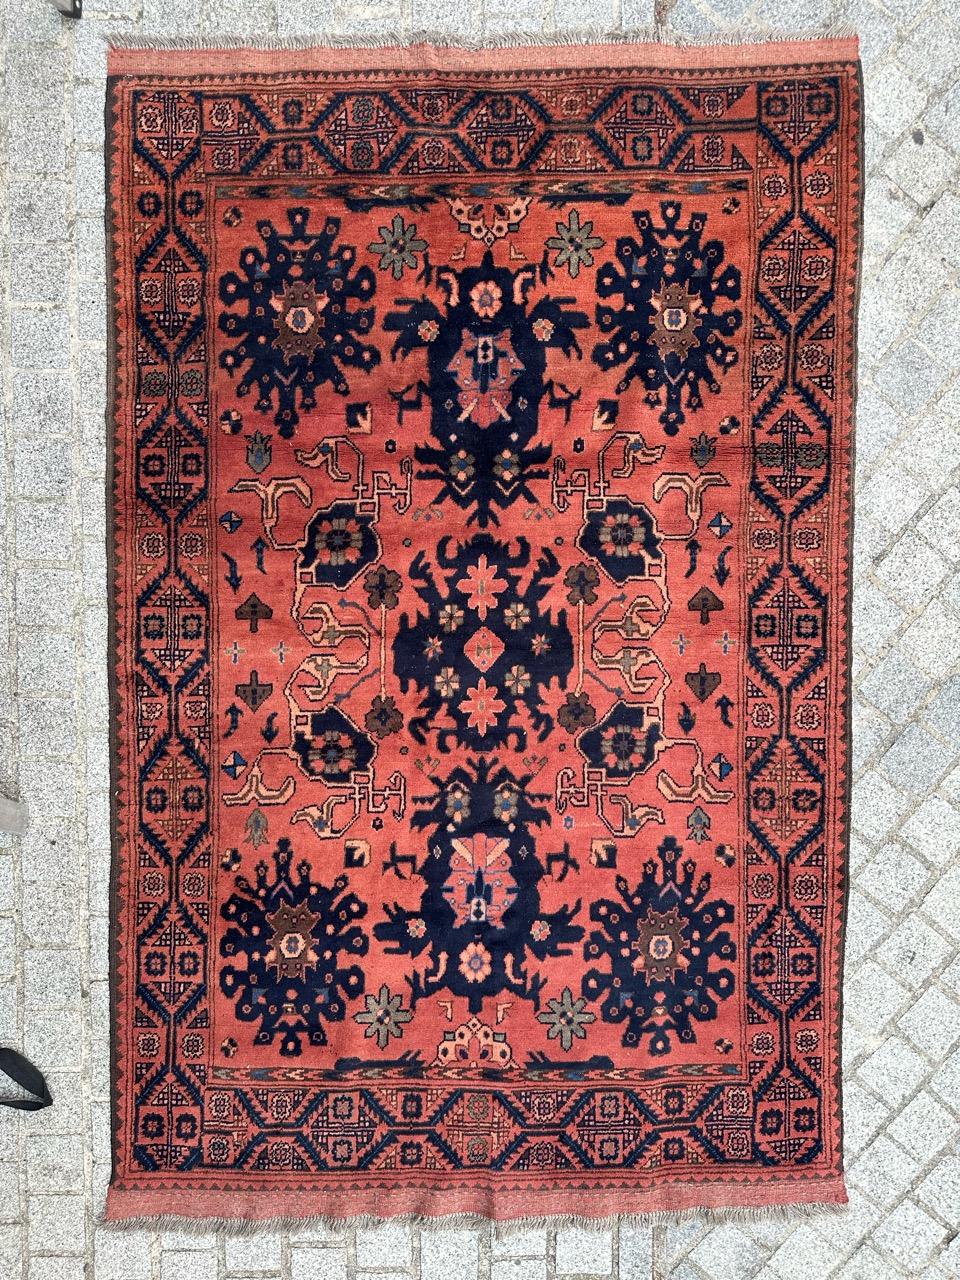 Beautiful Afghan rug from the late 20th century, entirely hand-knotted in wool on a wool foundation. It features stylized and decorative designs on a salmon-red background adorned with dark blue palmettes, stylized crabs, and white arabesques